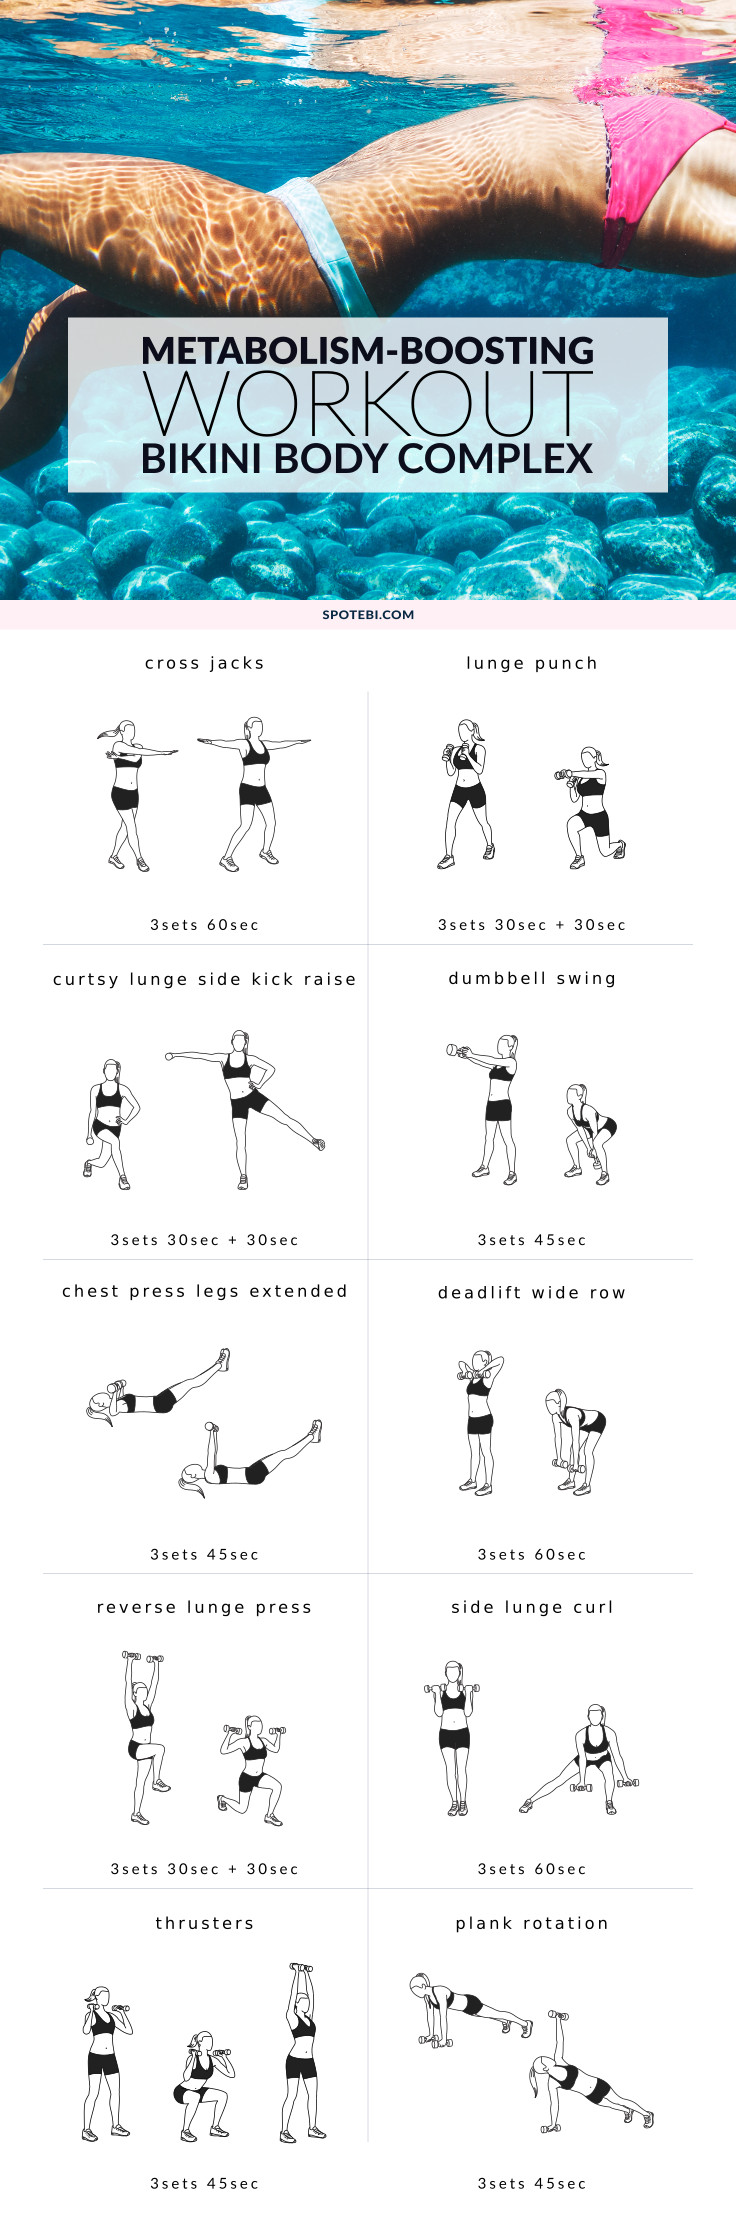 24 Full Body Weight Loss Workouts That Will Strip Belly Fat! -  TrimmedandToned